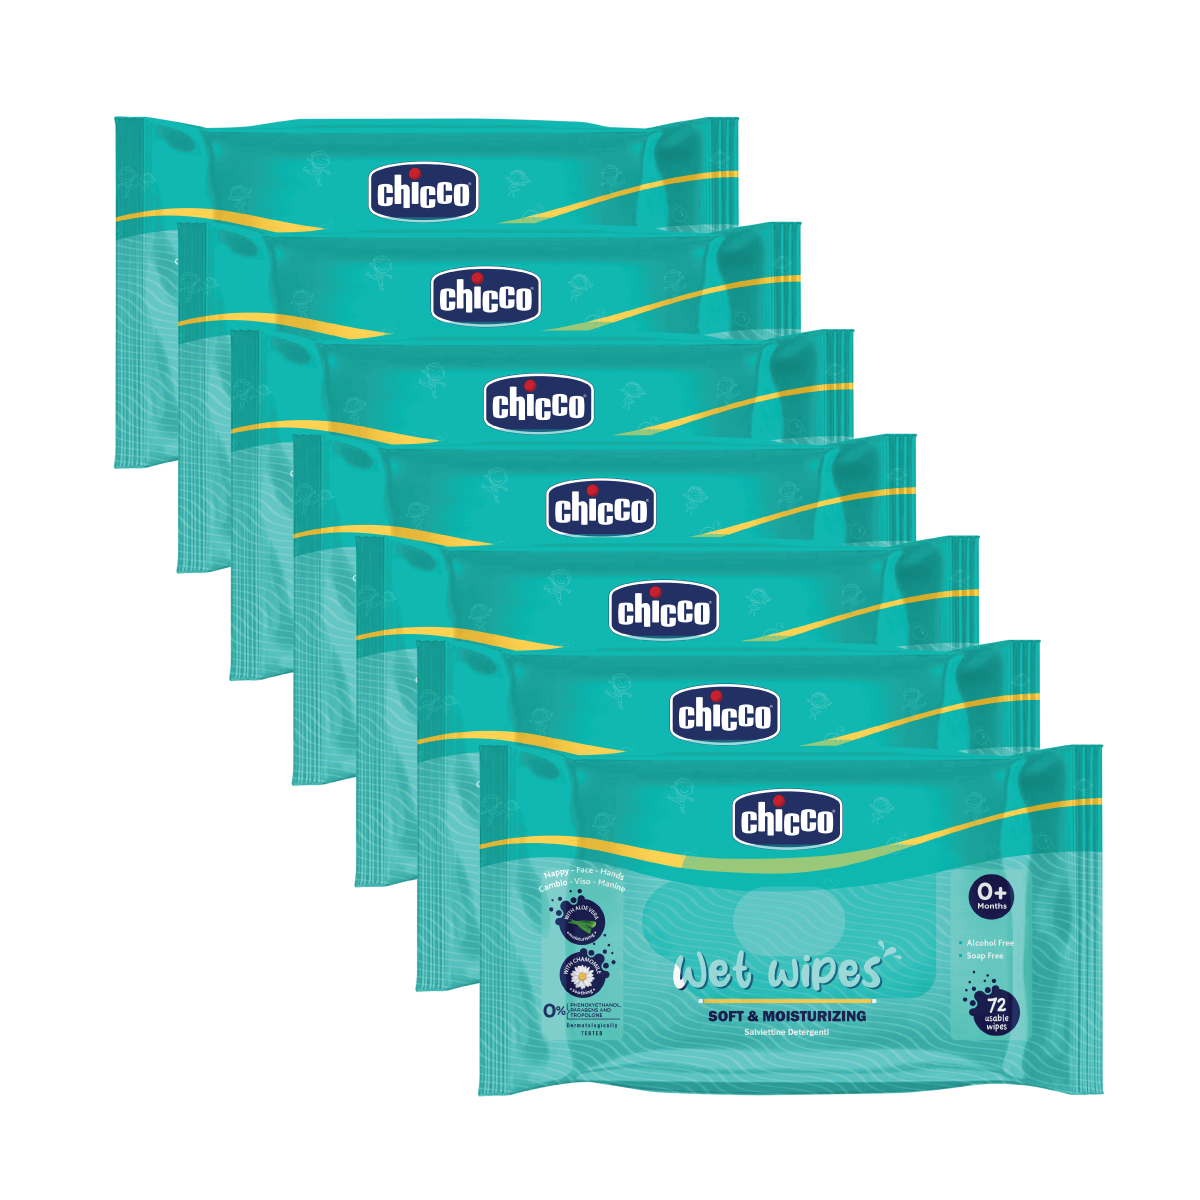 Chicco Wetwipes Pack of 6-504 PCS